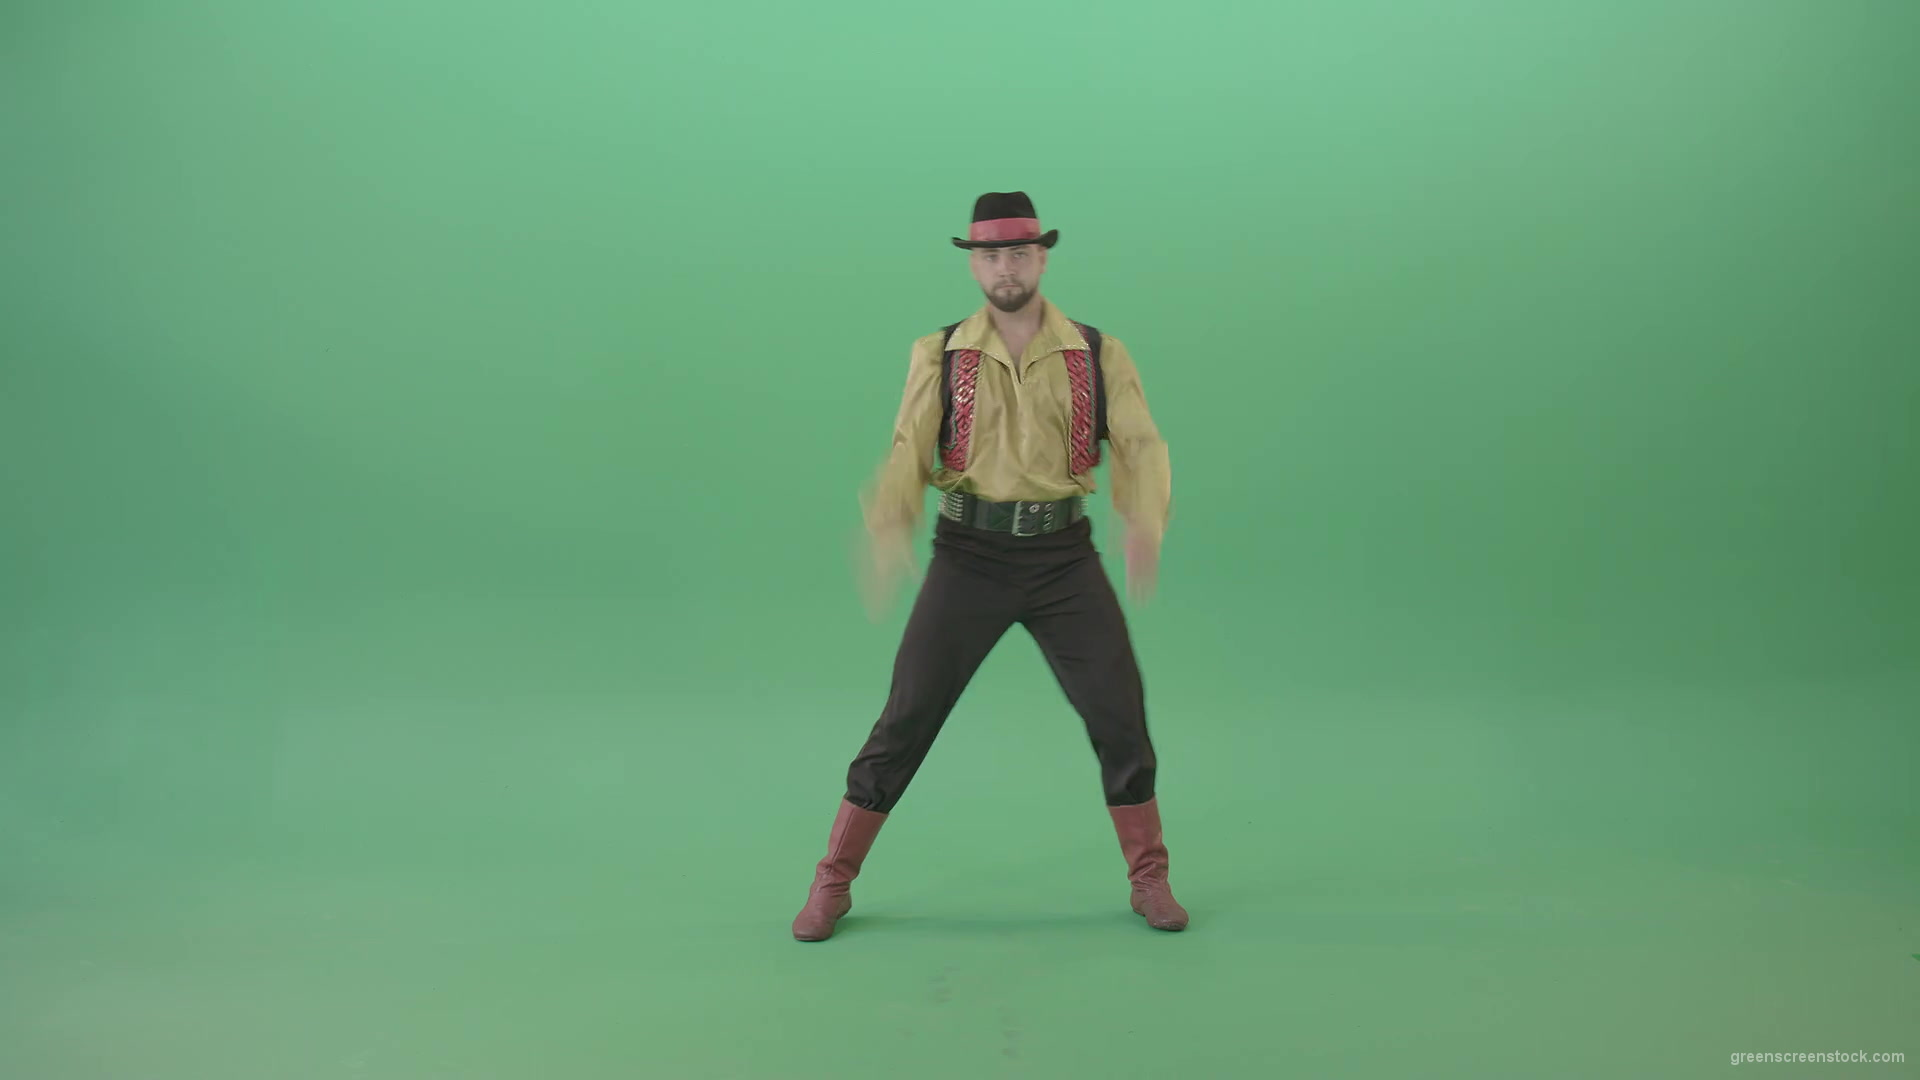 Moldova-man-dancing-with-clapping-isolated-on-Green-Screen-4K-Video-Footage-1920_004 Green Screen Stock